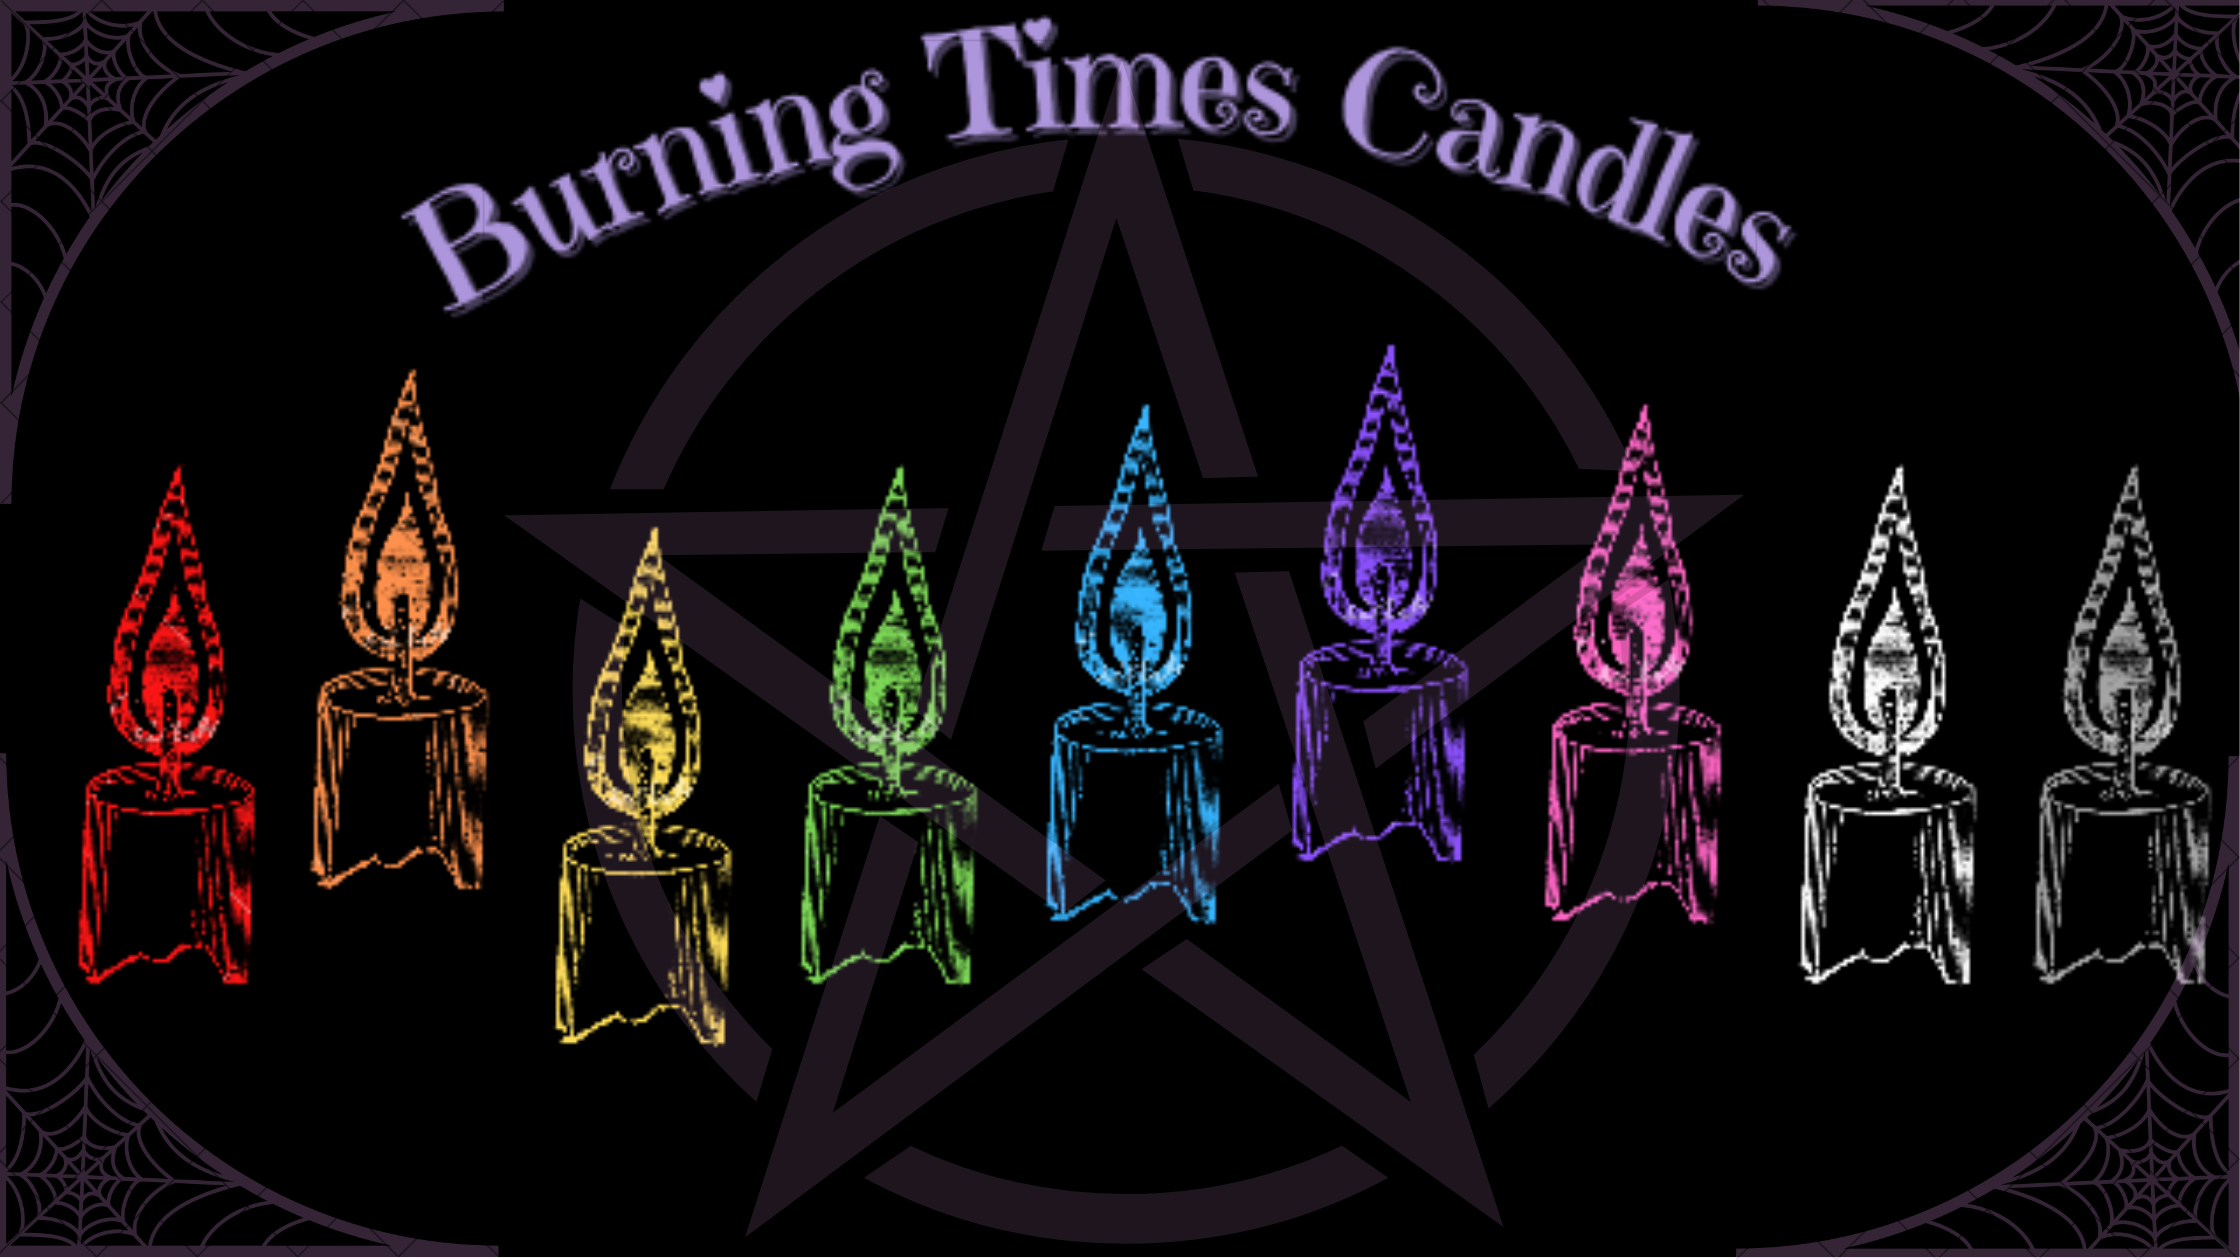 Burning Times Candles